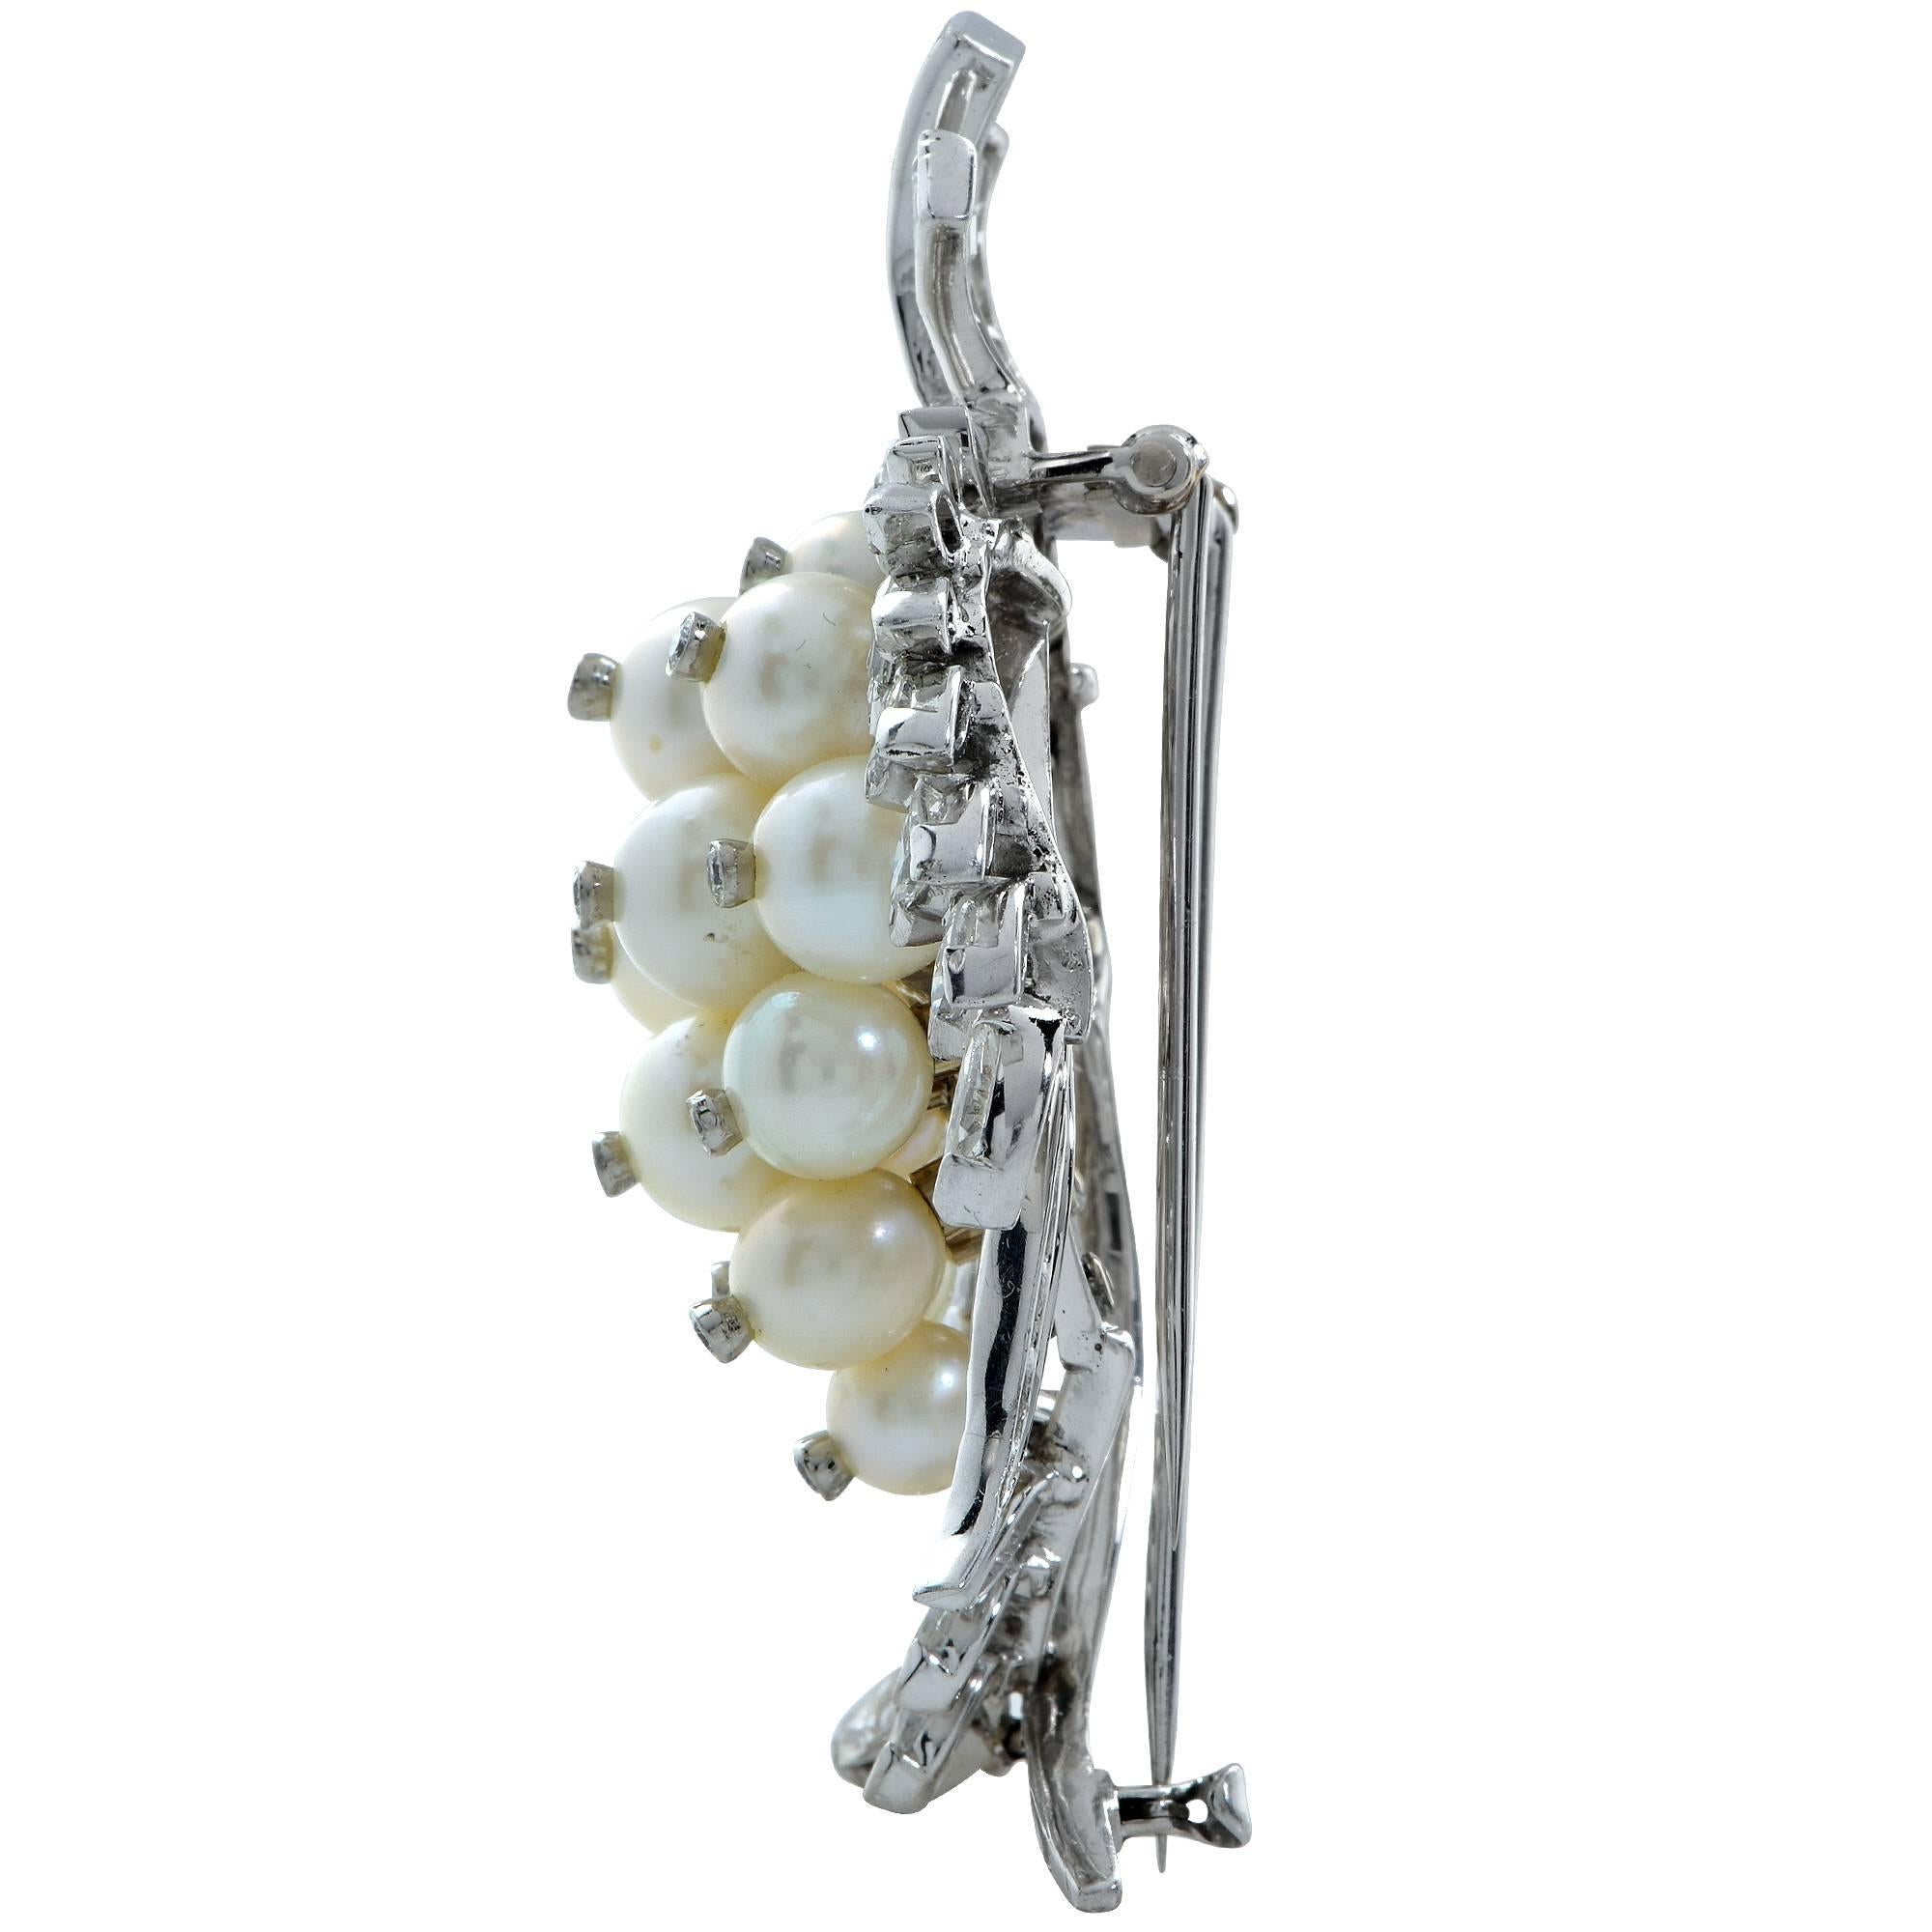 Beautifully crafted platinum brooch featuring 79 marquise, baguette and round brilliant cut diamonds weighing approximately 6cts total, G-J color VS-SI clarity accented by 15 pearls ranging from 5-8mm in diameter.

Measurements are available upon